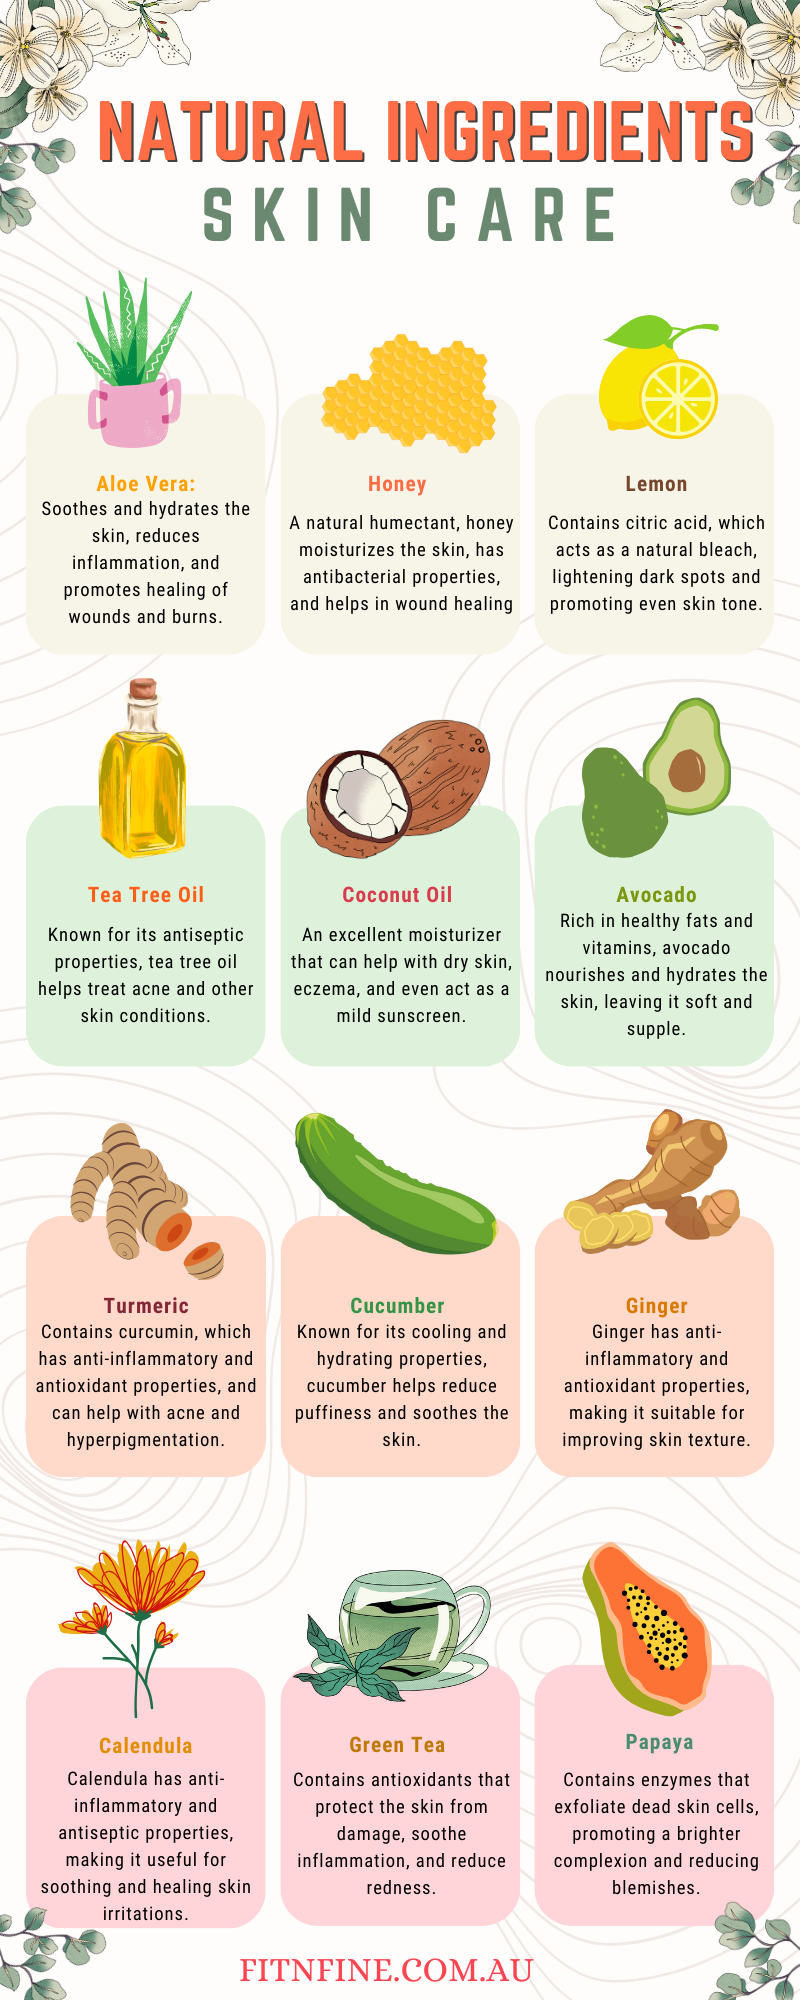 Natural Ingredients and their Skin Benefits